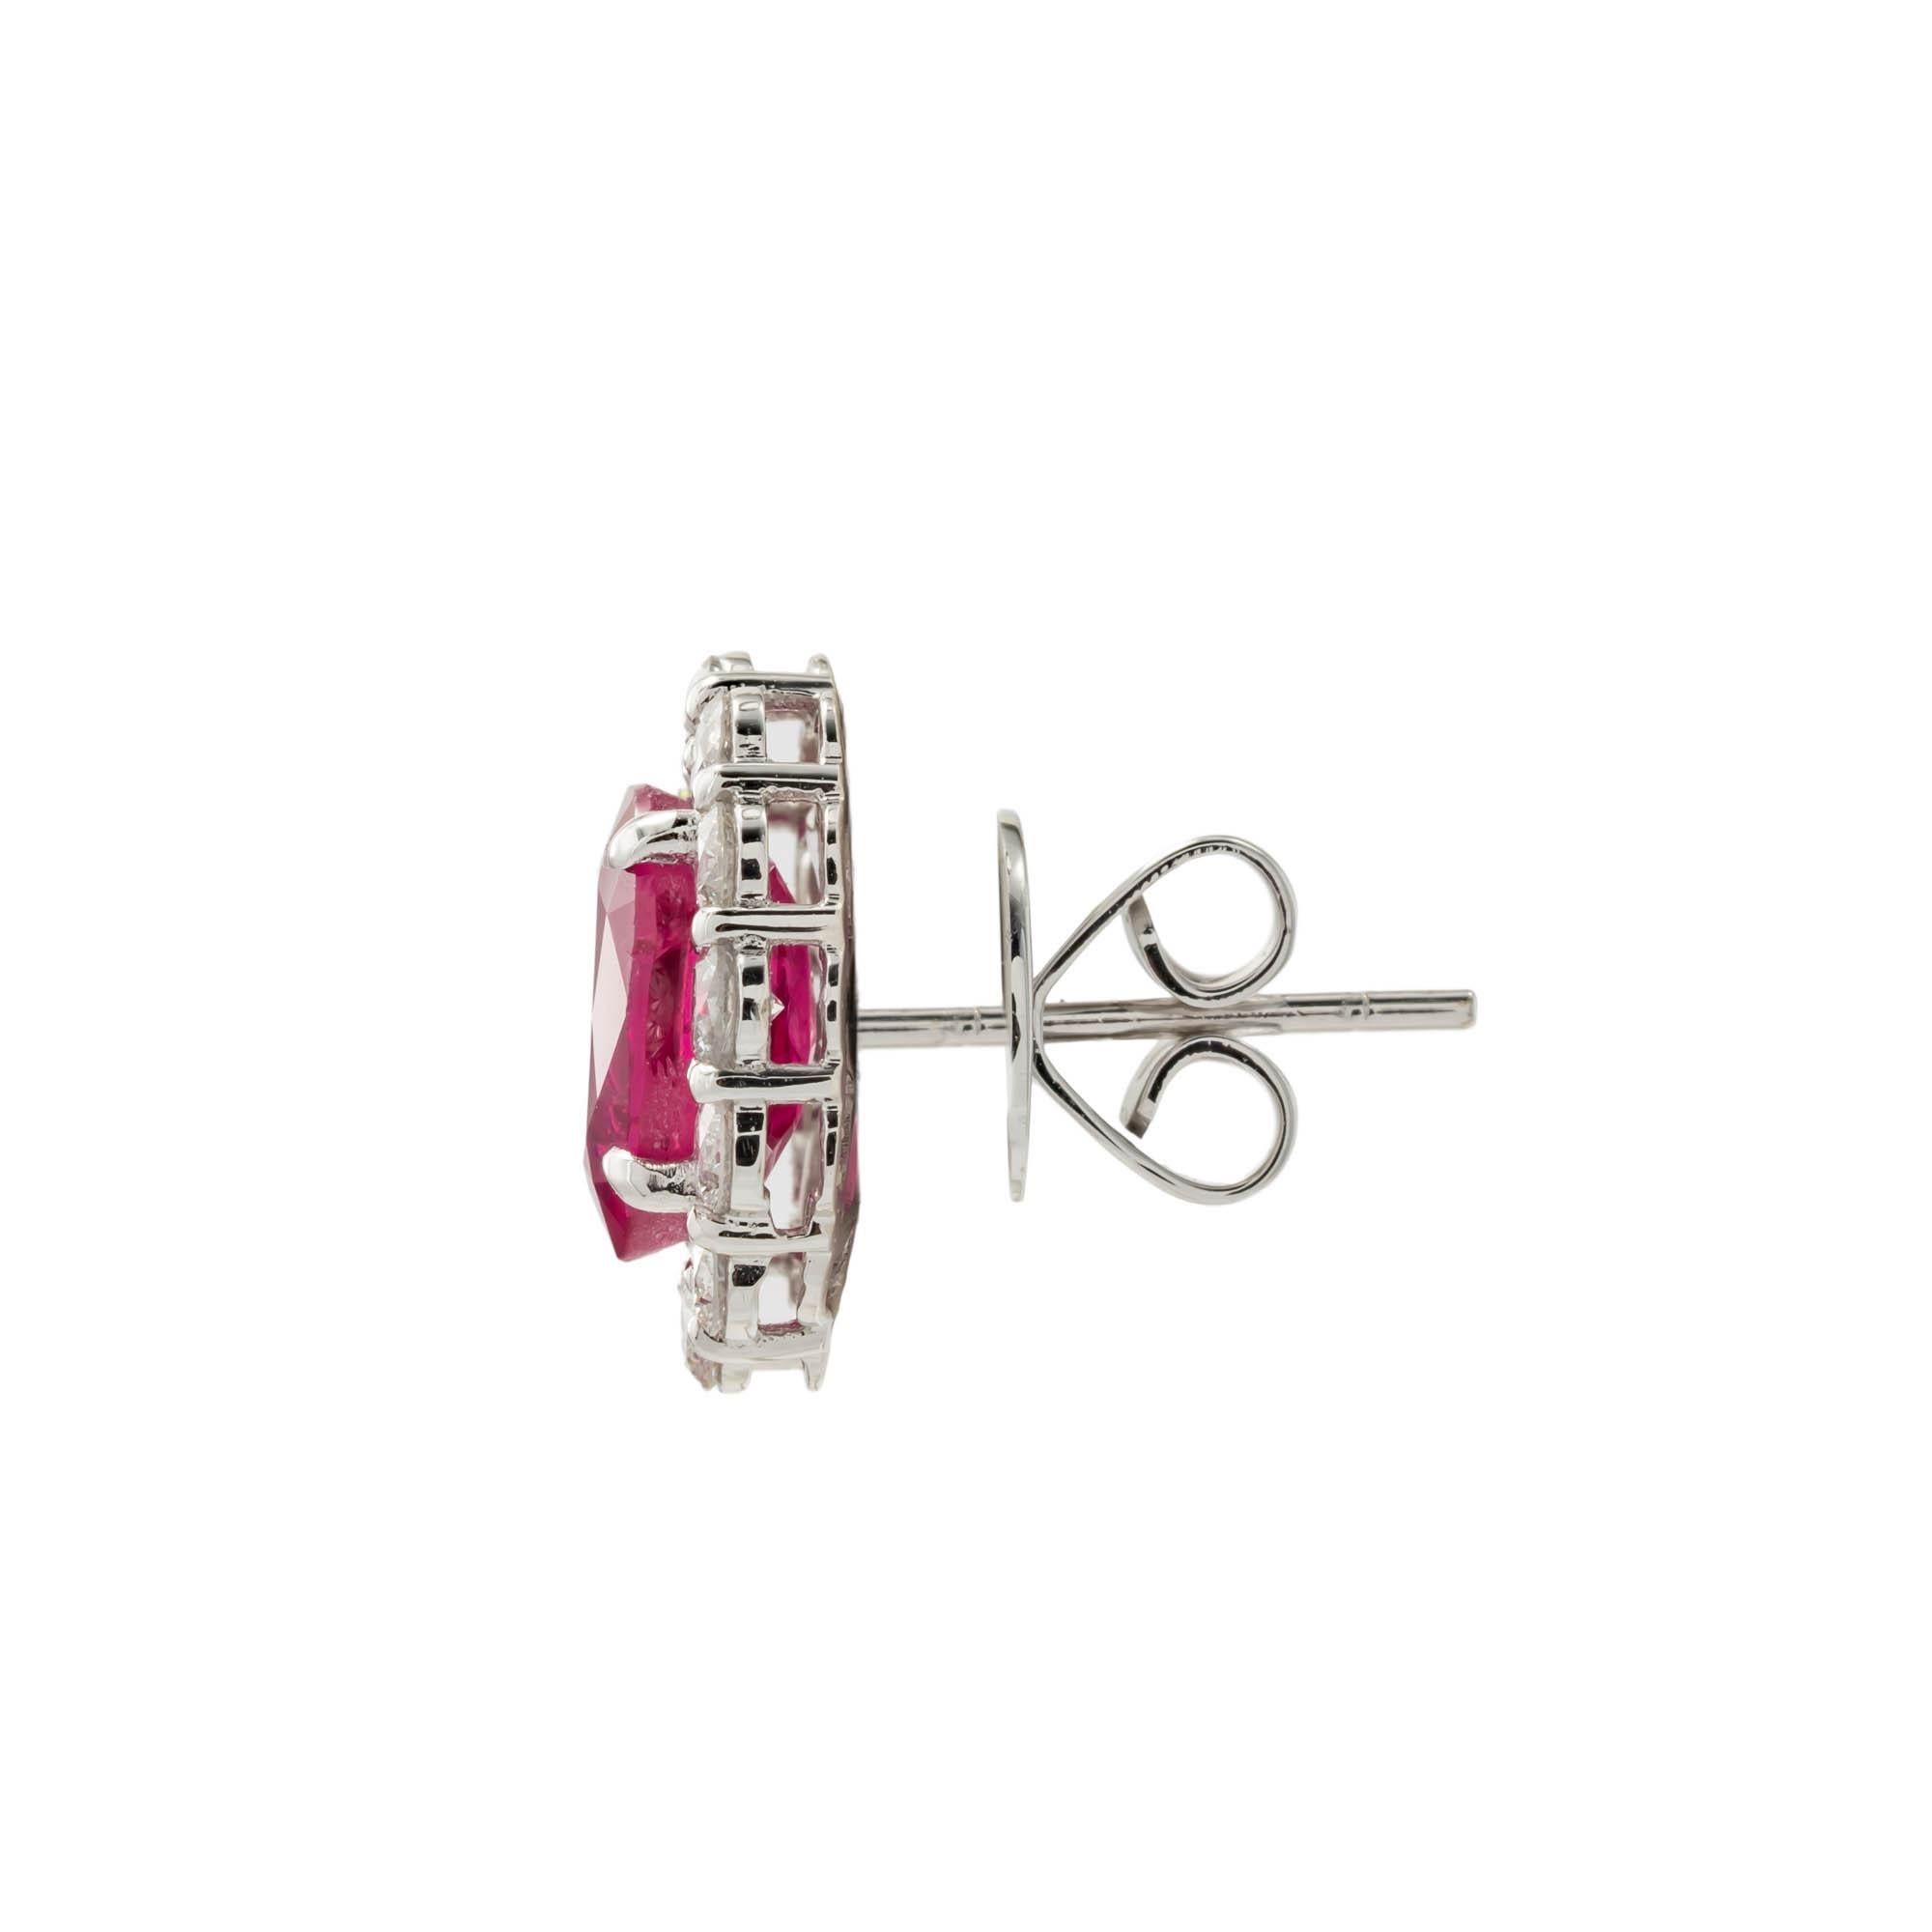 Platinum vintage style earrings featuring two oval shaped rubies having a total weight of 4.24 carats with with AGTA certificate #95000505 stating no heat the rubies are framed with halo consisting of 24 diamonds with a total weight of 1.18 carats